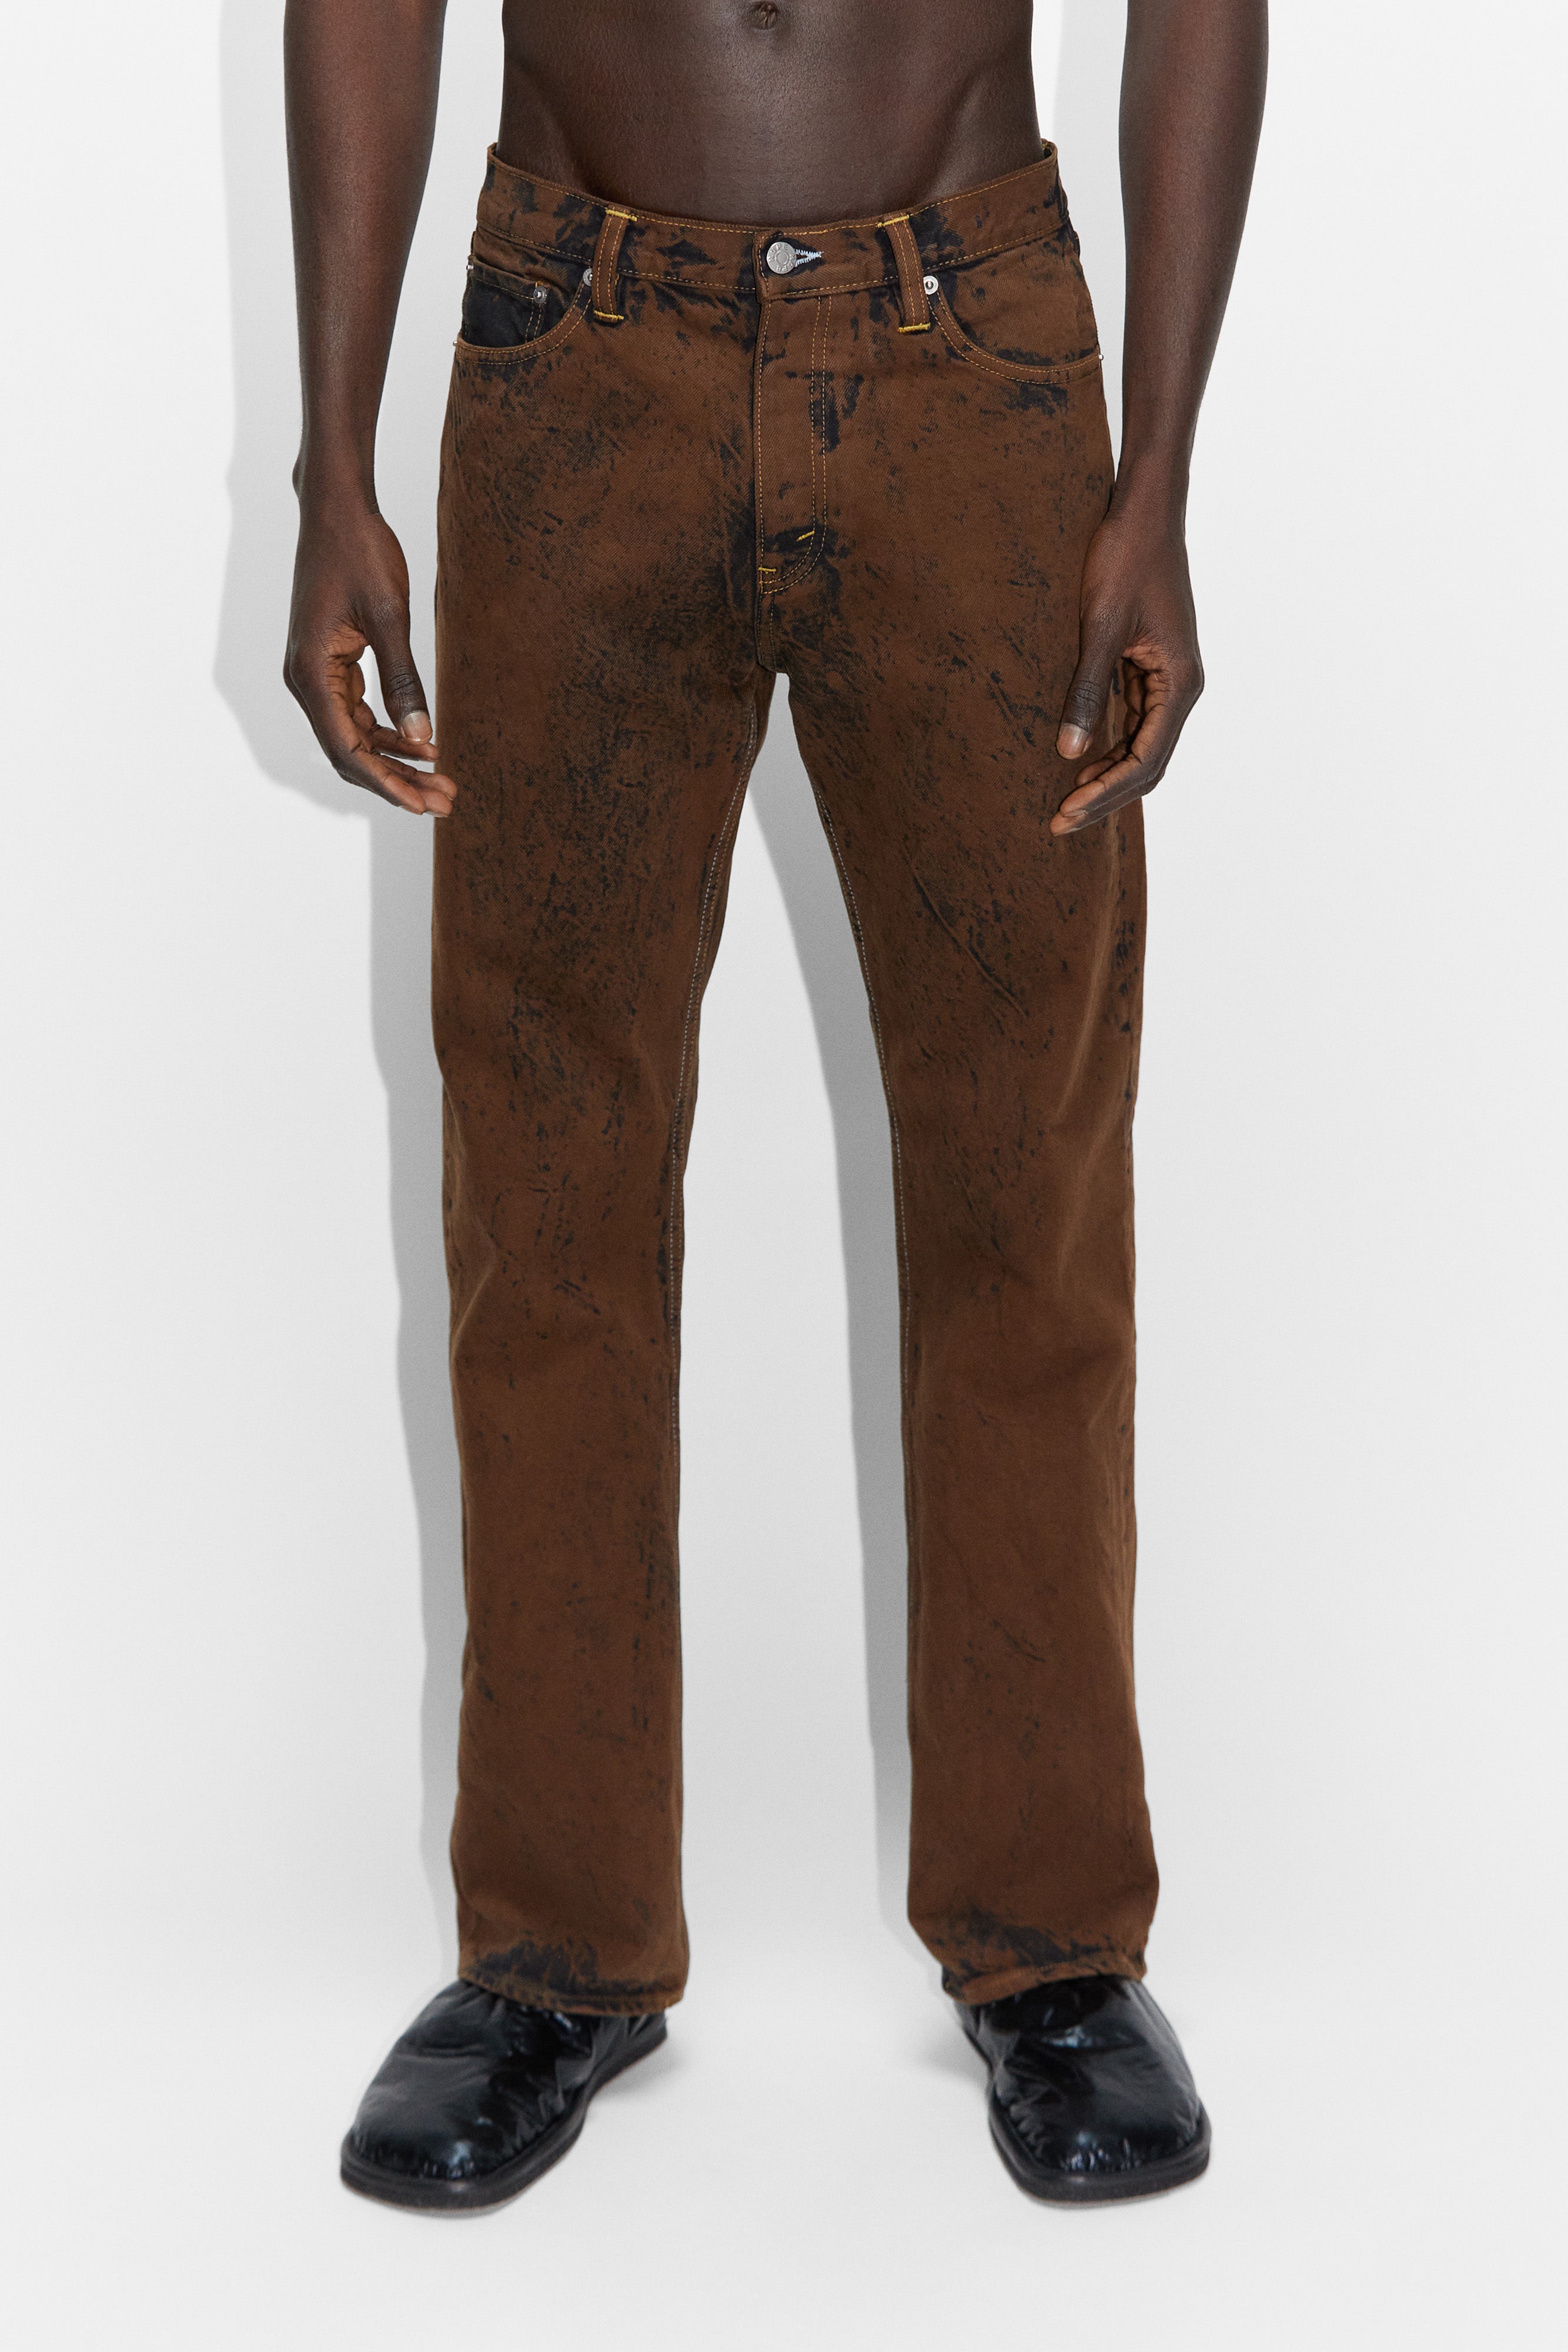 in – Relaxed HOPE Acid Brown Rush Jeans - STHLM Bootcut